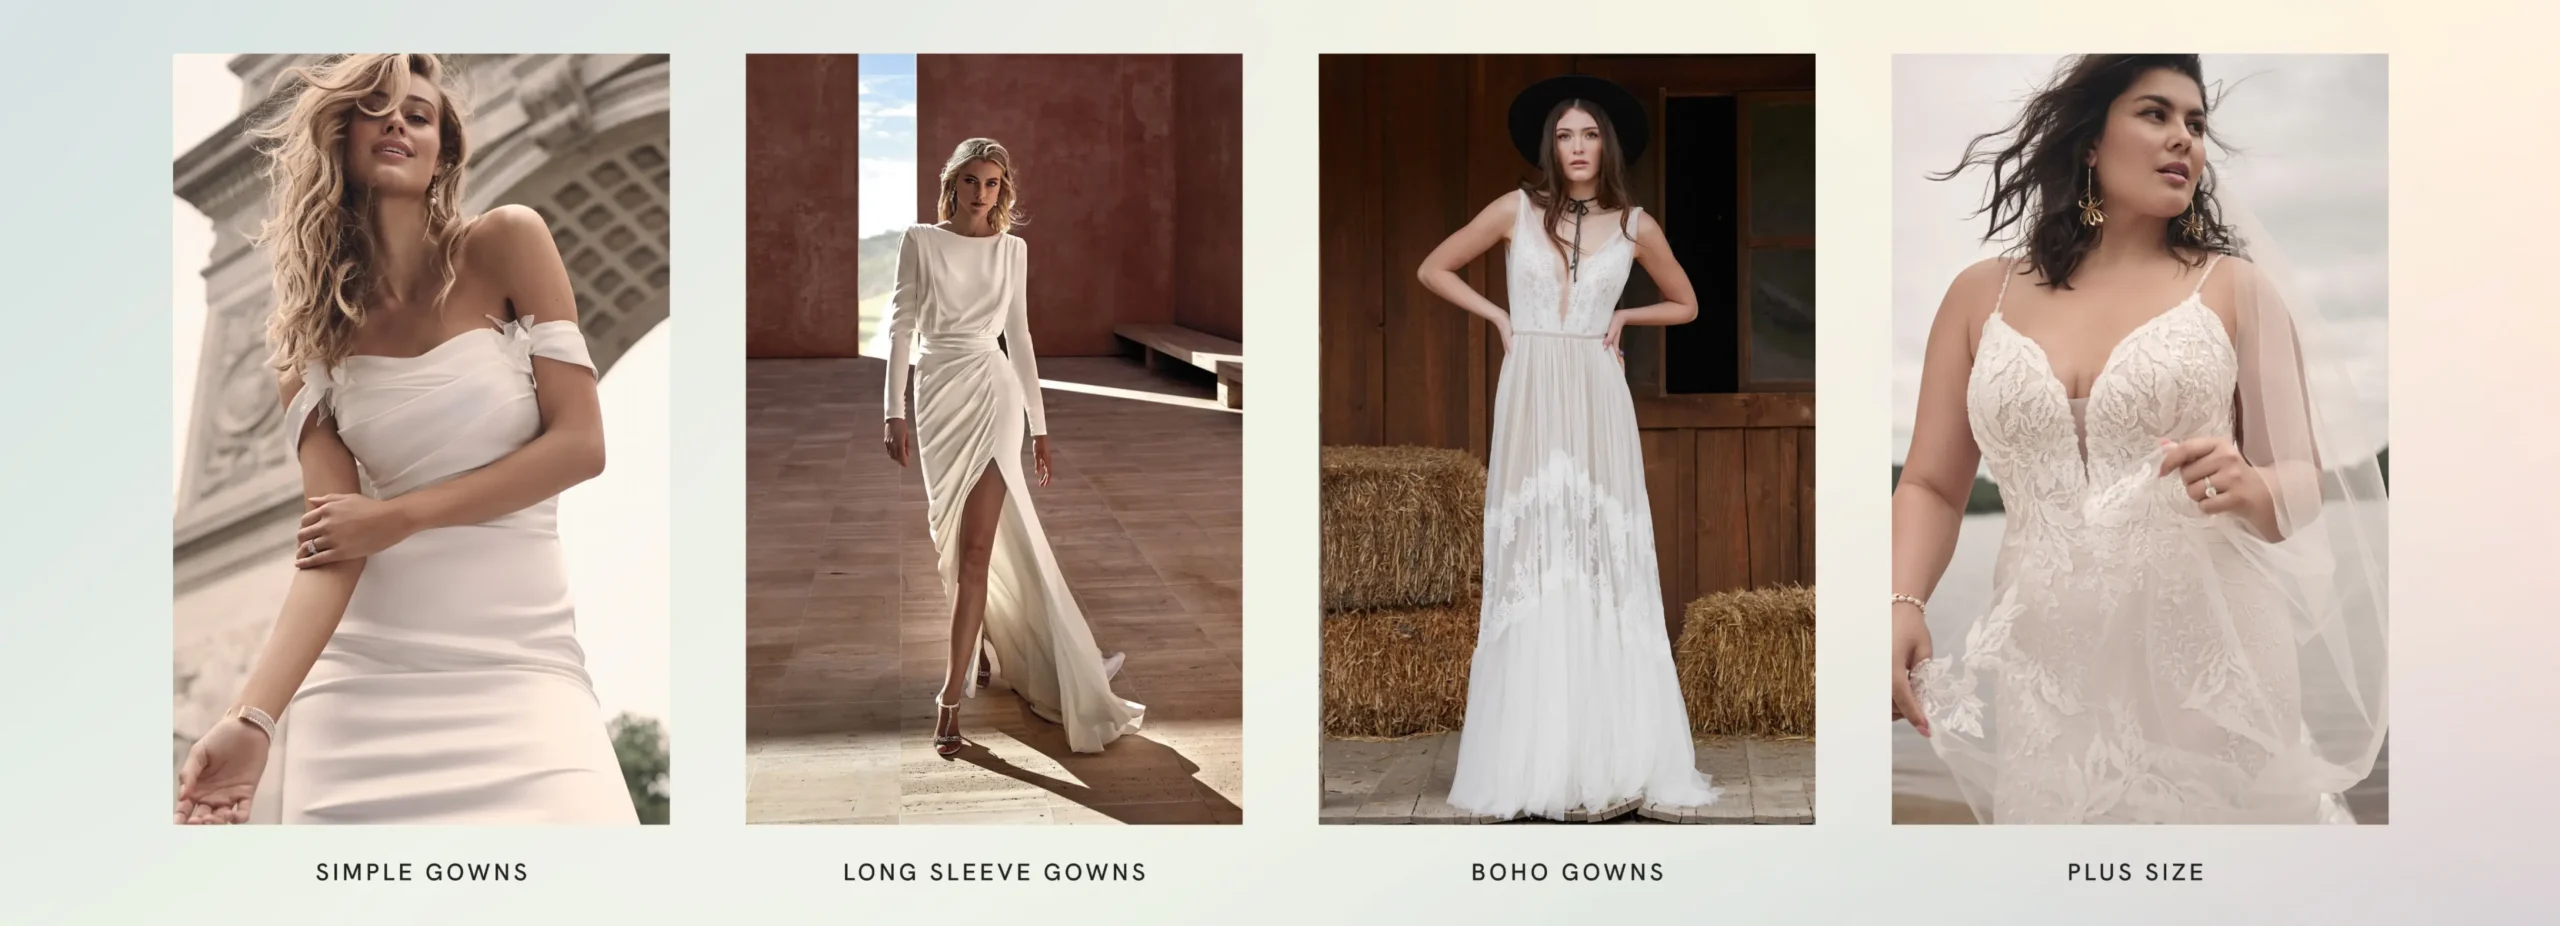 The Bridal Gallery - Shopify store development